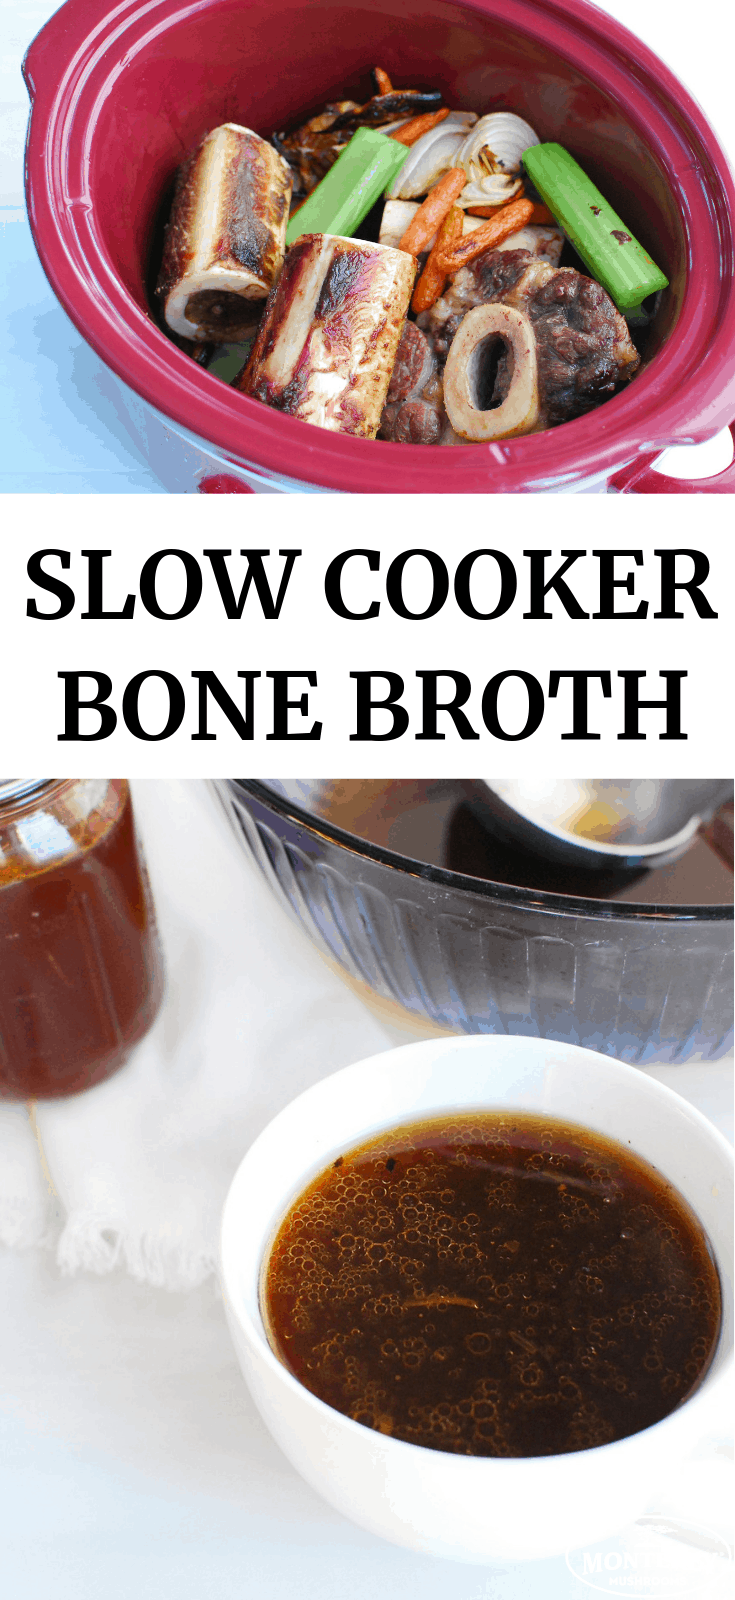 Slow Cooker Beef Bone Broth Recipe (+ Bone Broth Benefits and Facts!)